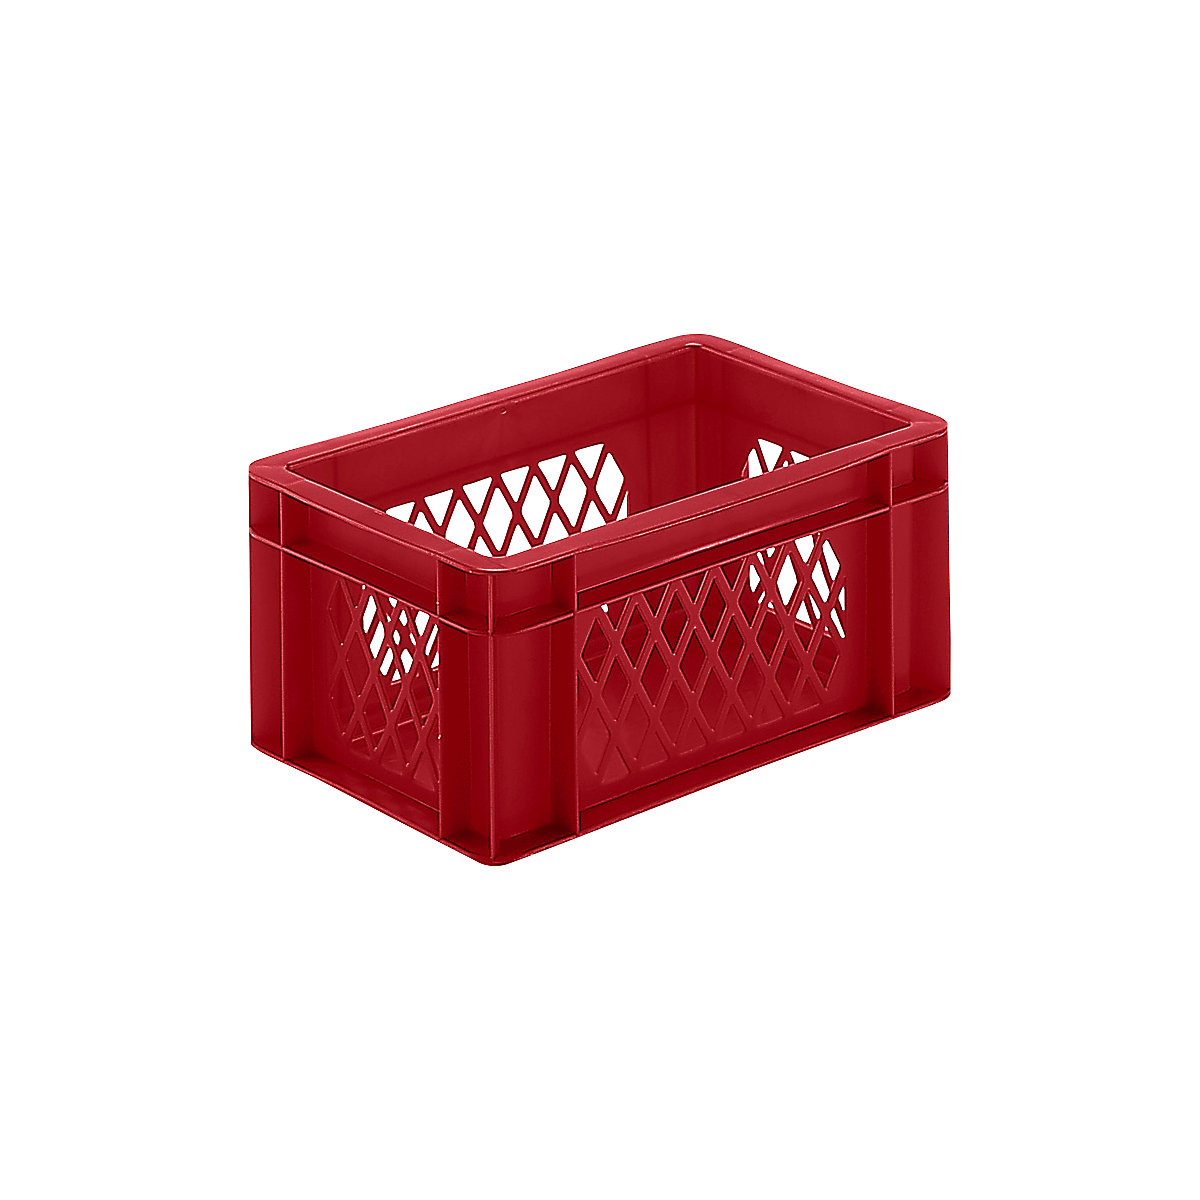 Euro stacking container, perforated walls, closed base, LxWxH 300 x 200 x 145 mm, red, pack of 5-6